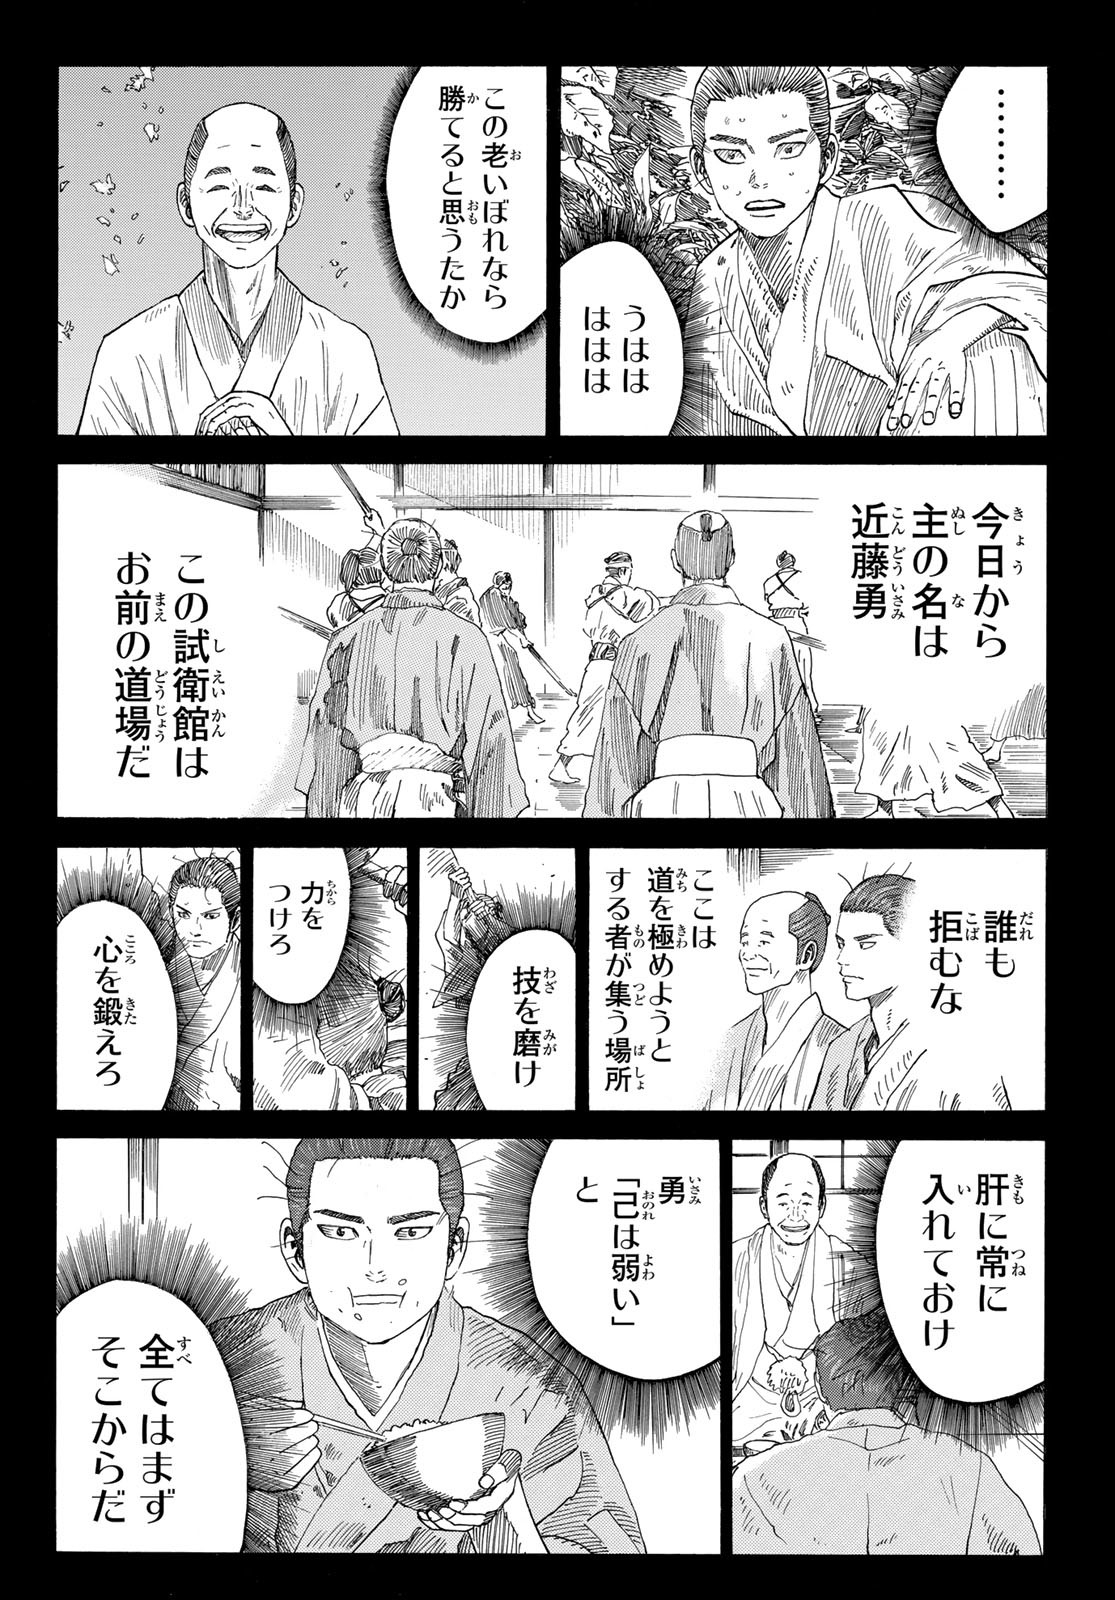 An Mo Miburo 第47話 - Page 18